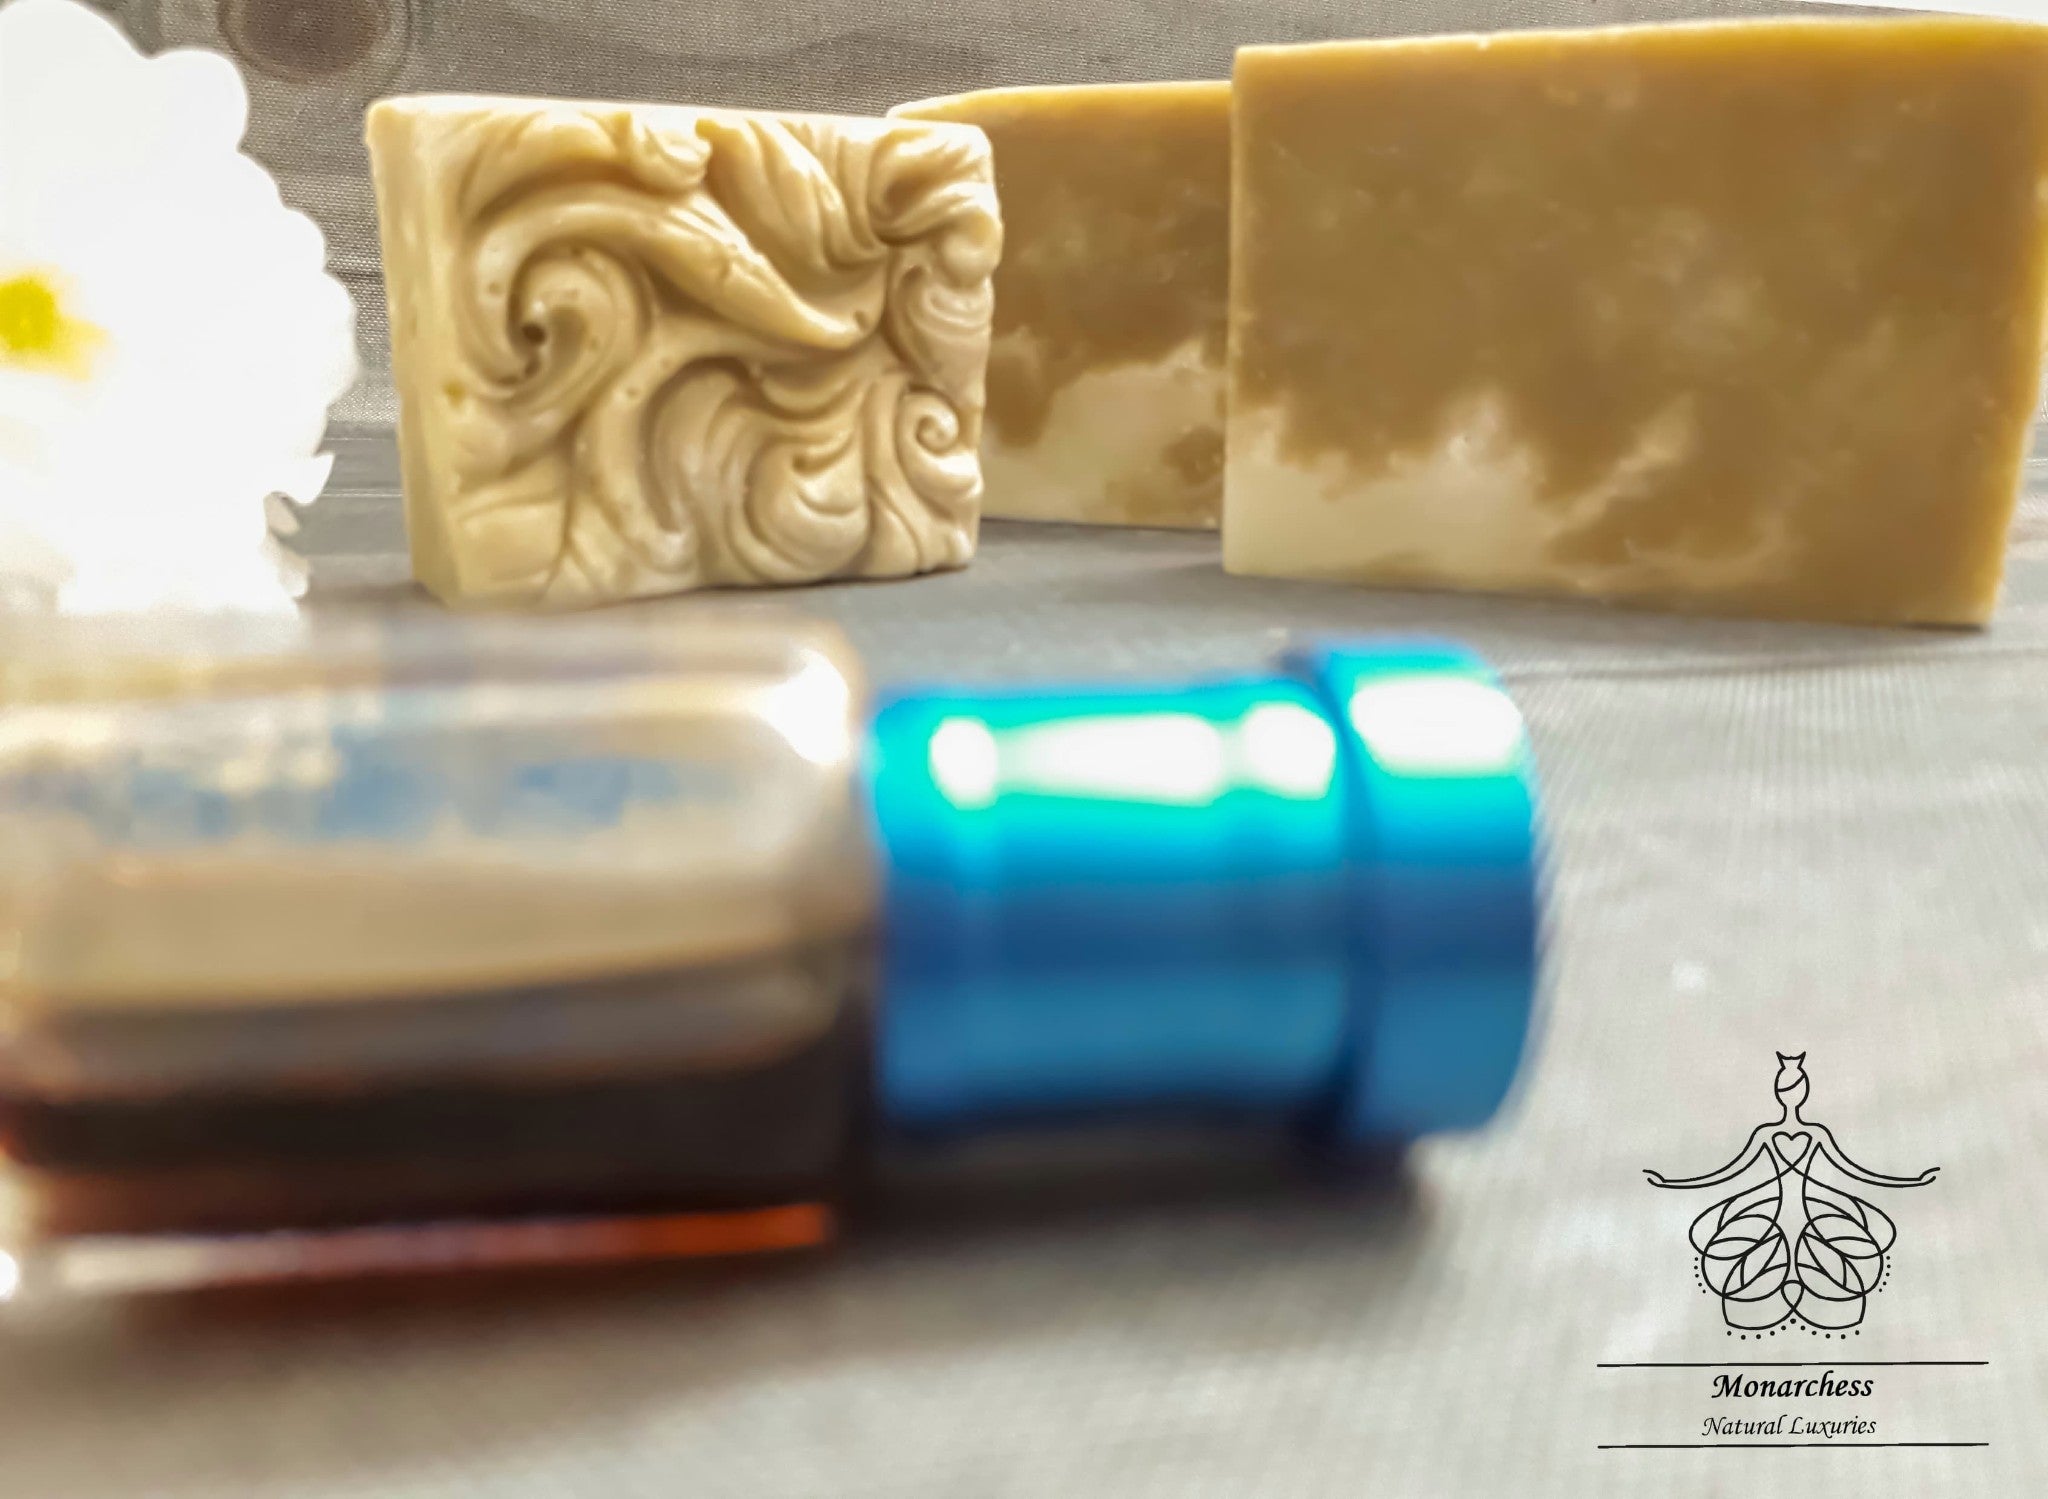 Scent of East Soap. Moisturizing natural soap with shea butter and black musk. Monarchess Natural Luxuries skincare products. monarchess, Amman, Jordan